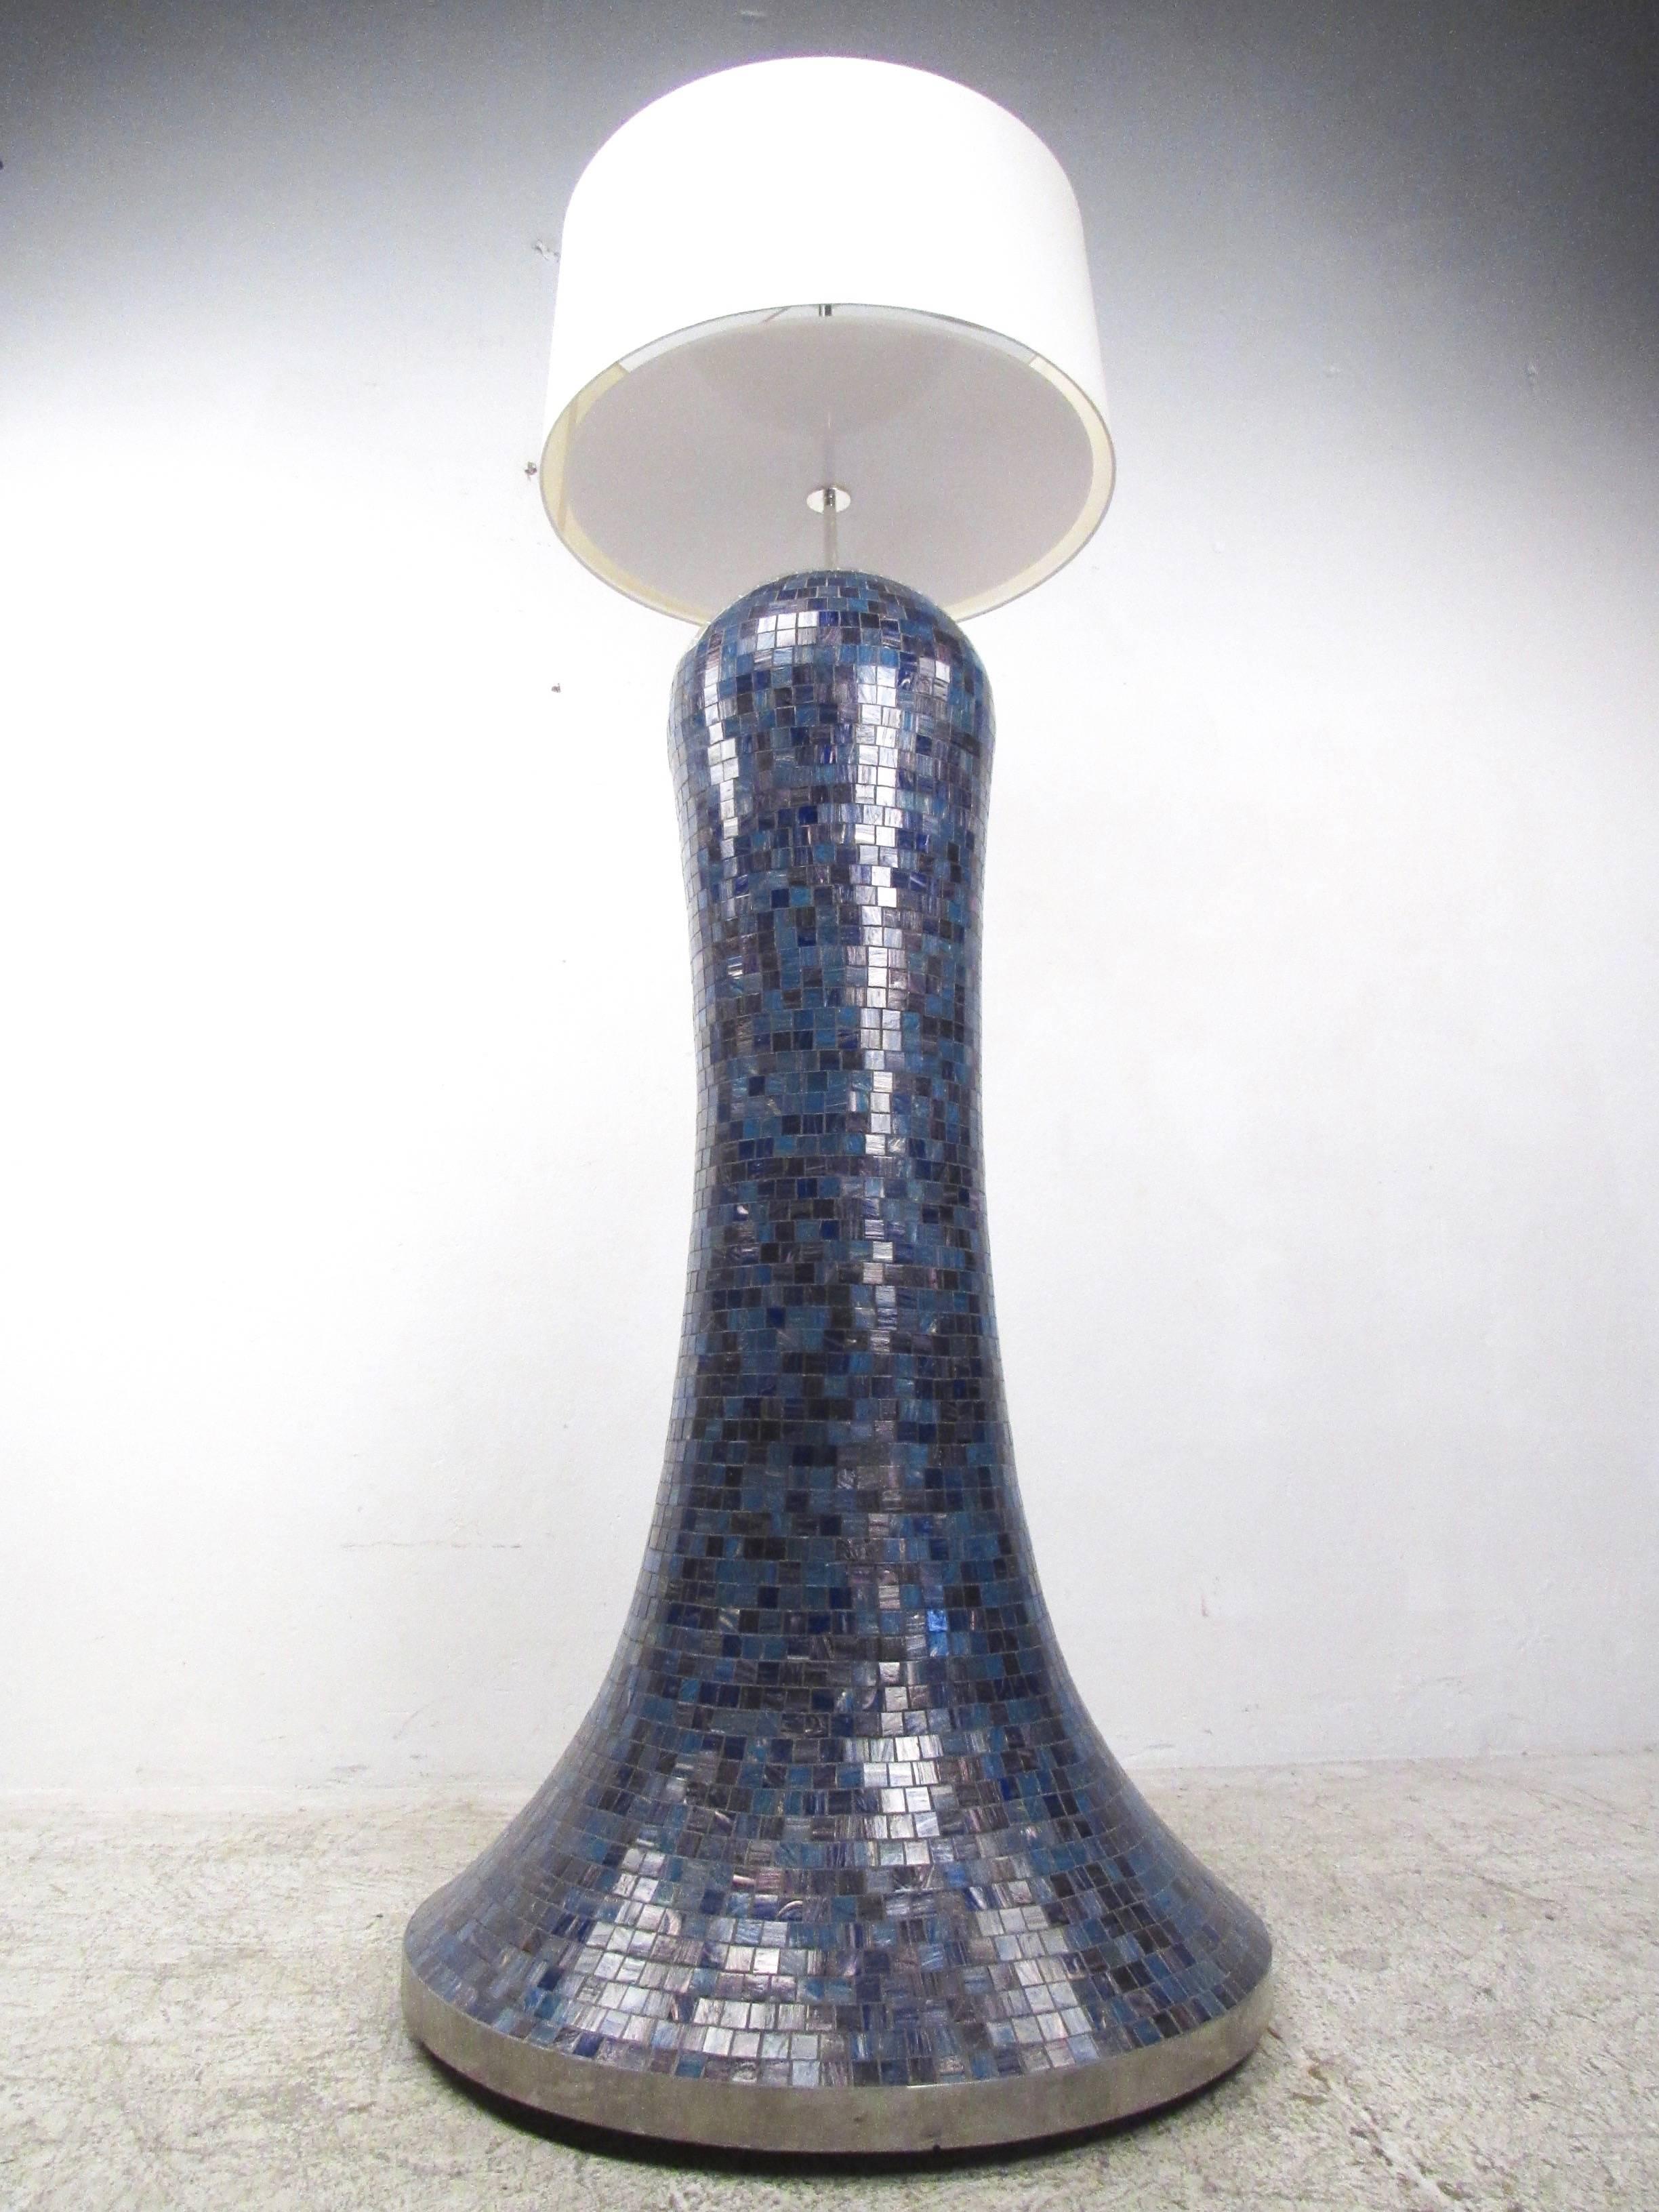 This impressive studio made floor lamp features a stunning oversized design with rounded top and flared base. Chrome trim and fixtures offer a unique contrast to the shades of blue and purple found throughout the mosaic tile finish. Unique silver